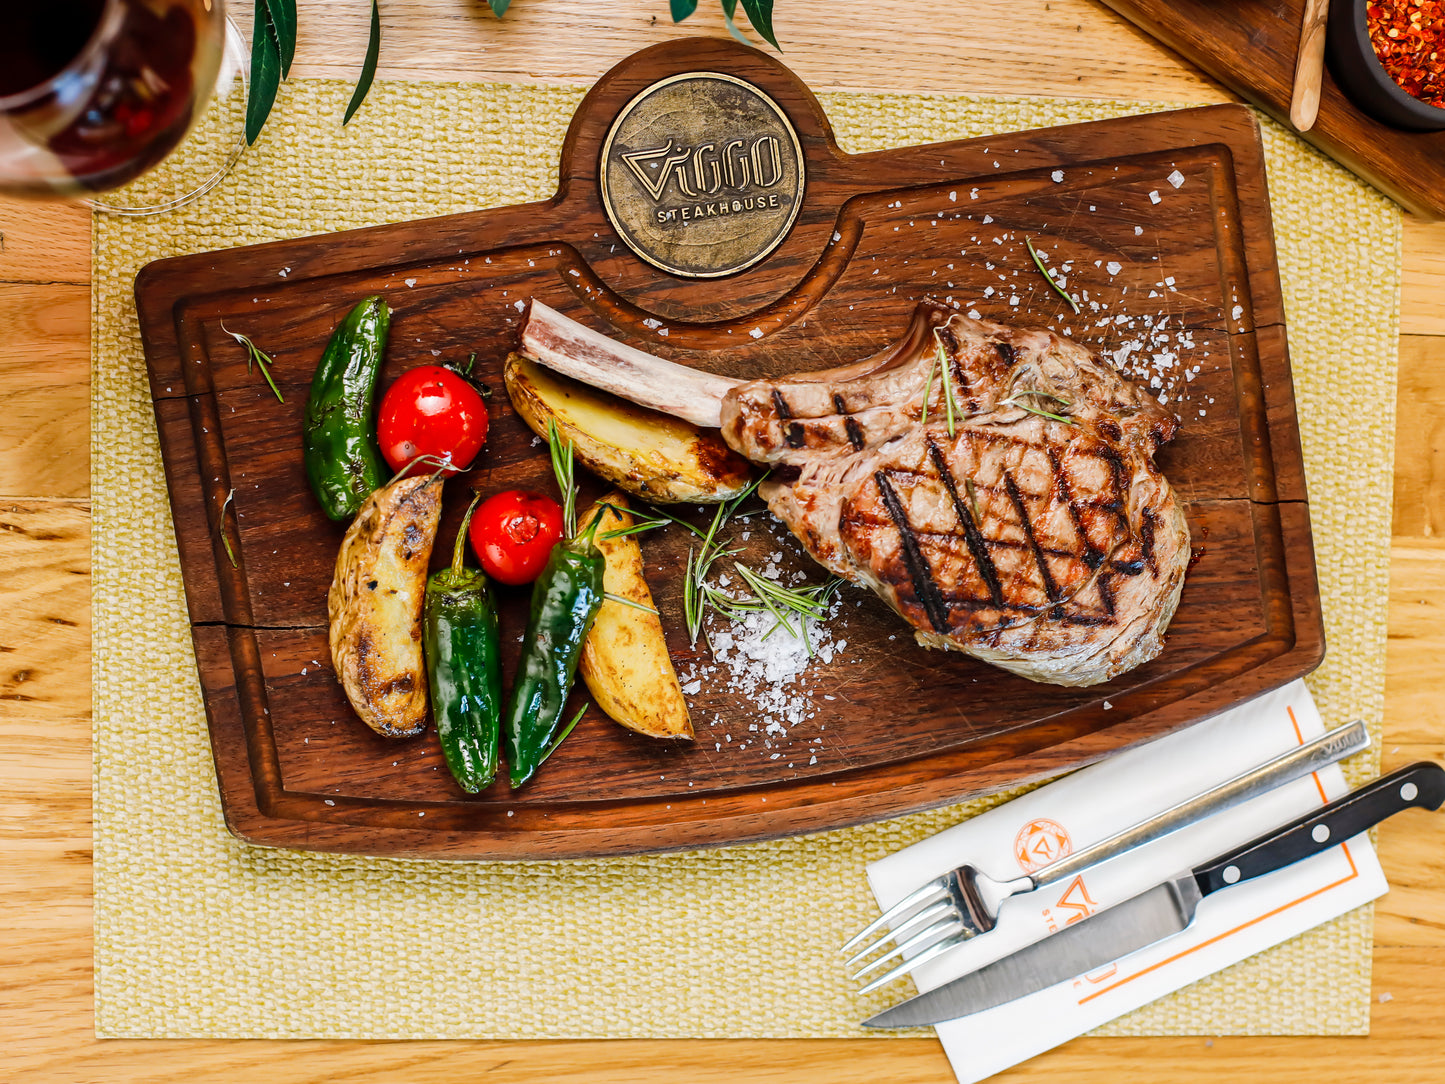 Grilled Veal Chop 350g